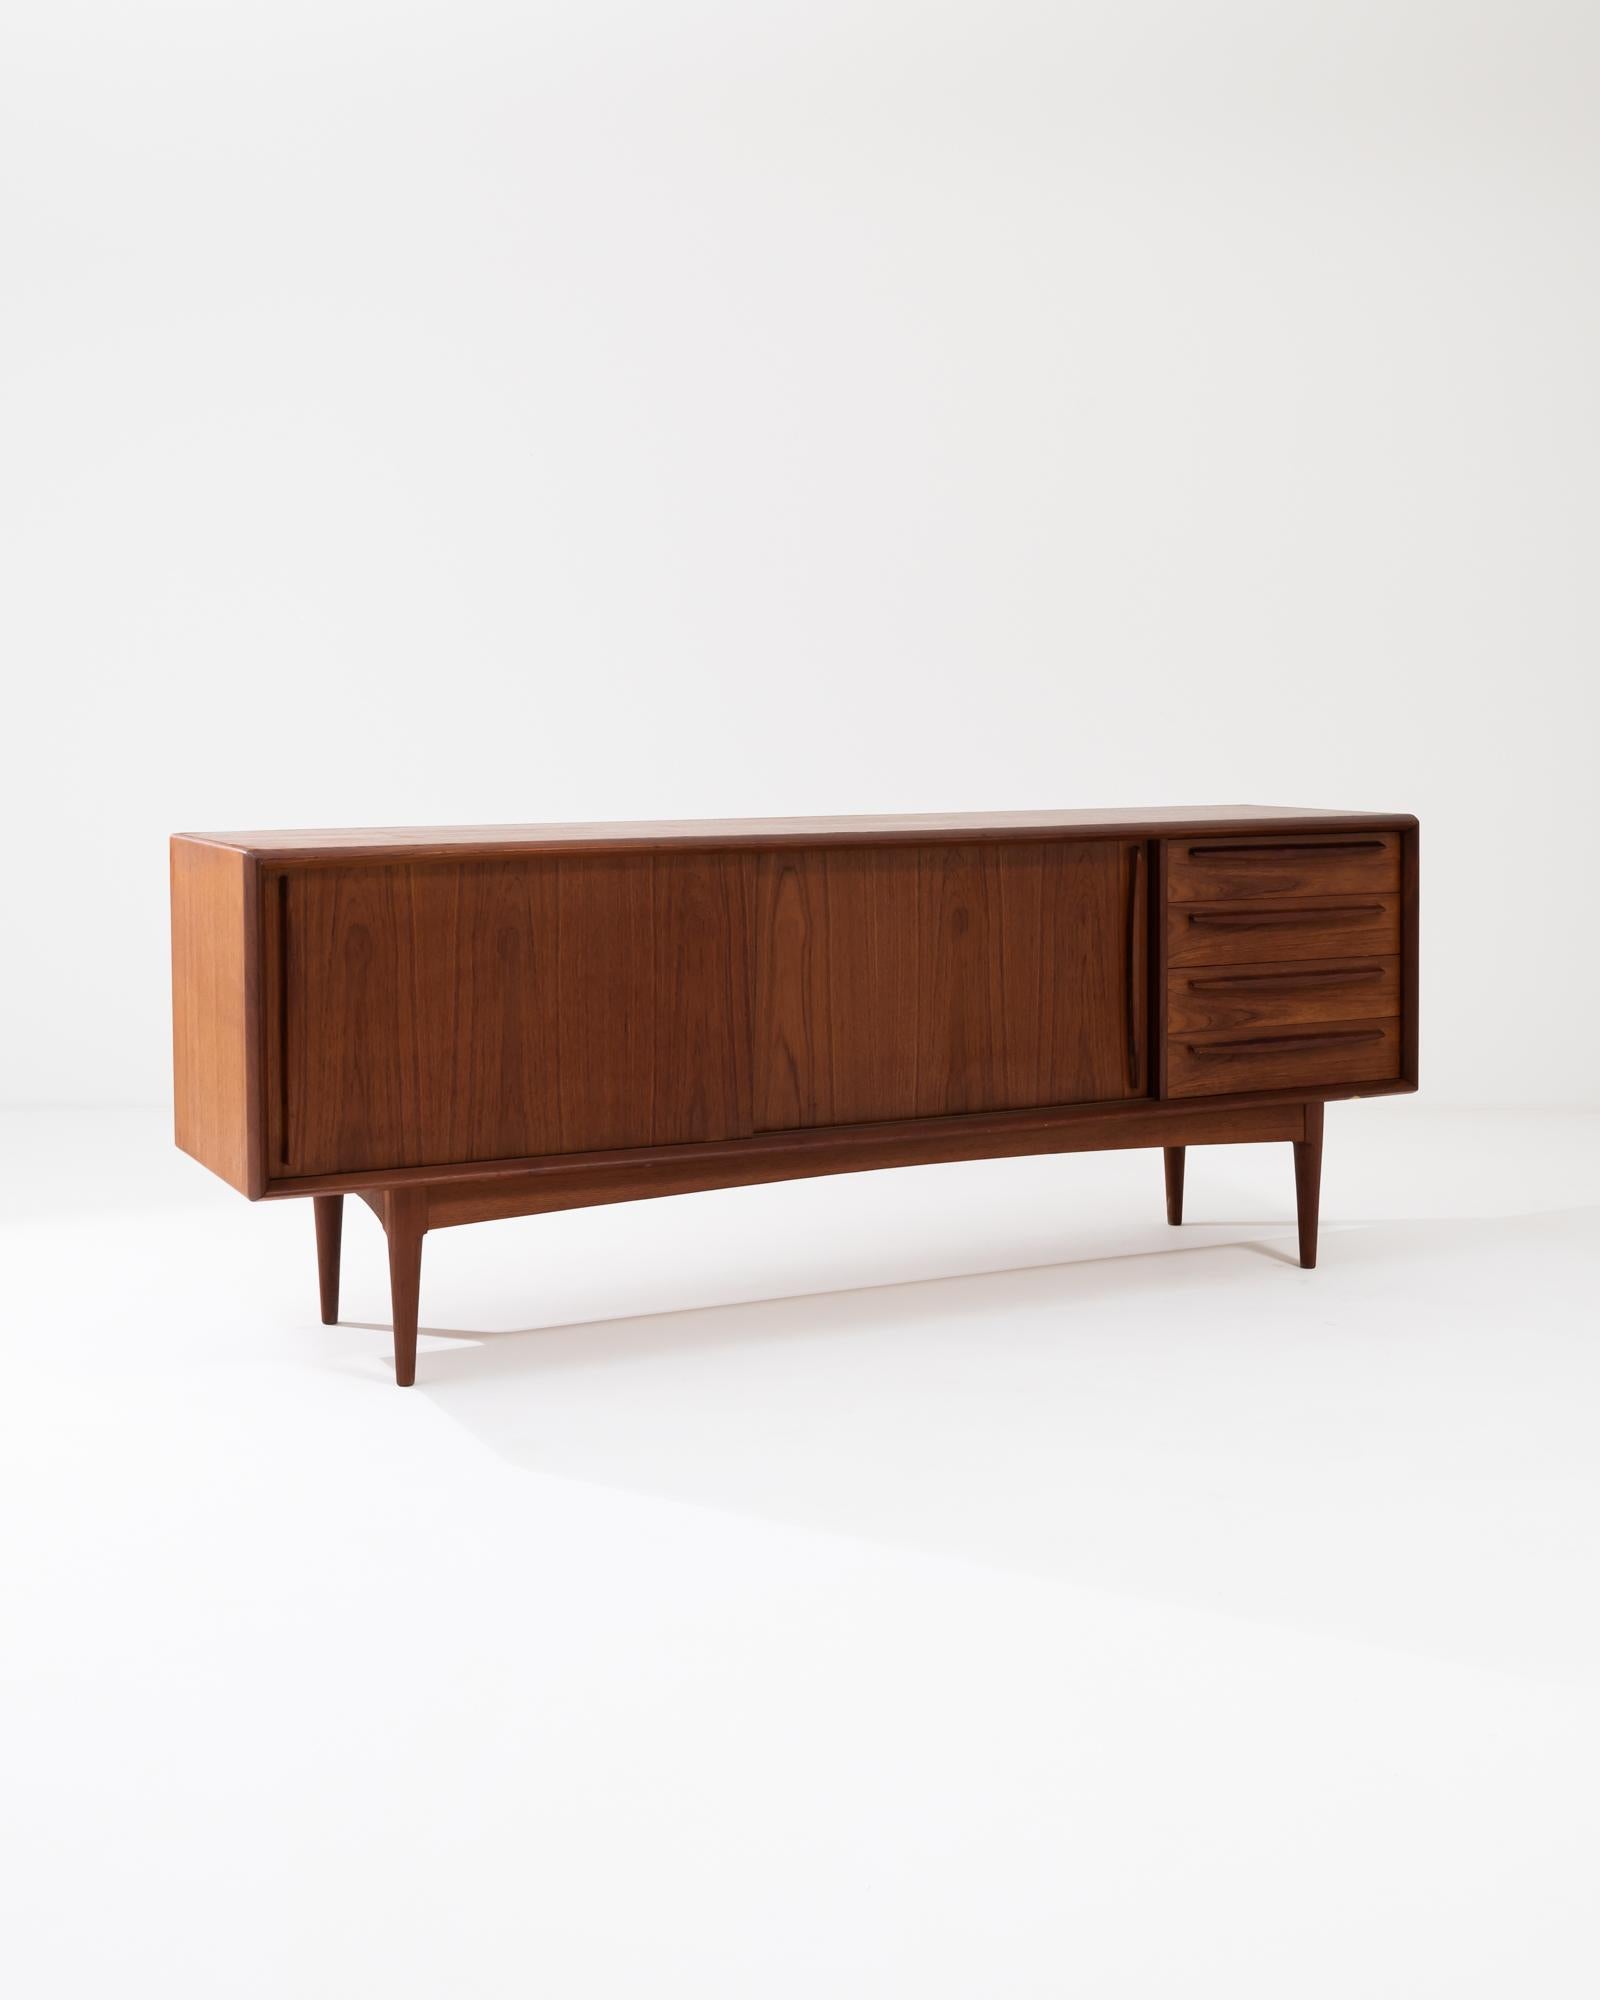 A wooden cabinet made in 1960s Denmark. Sleek geometric design and gleaming solid teak wood are Classic staples of midcentury Danish design. This long cabinet is composed with a surplus of drawers, three interior drawers on the left, and a four